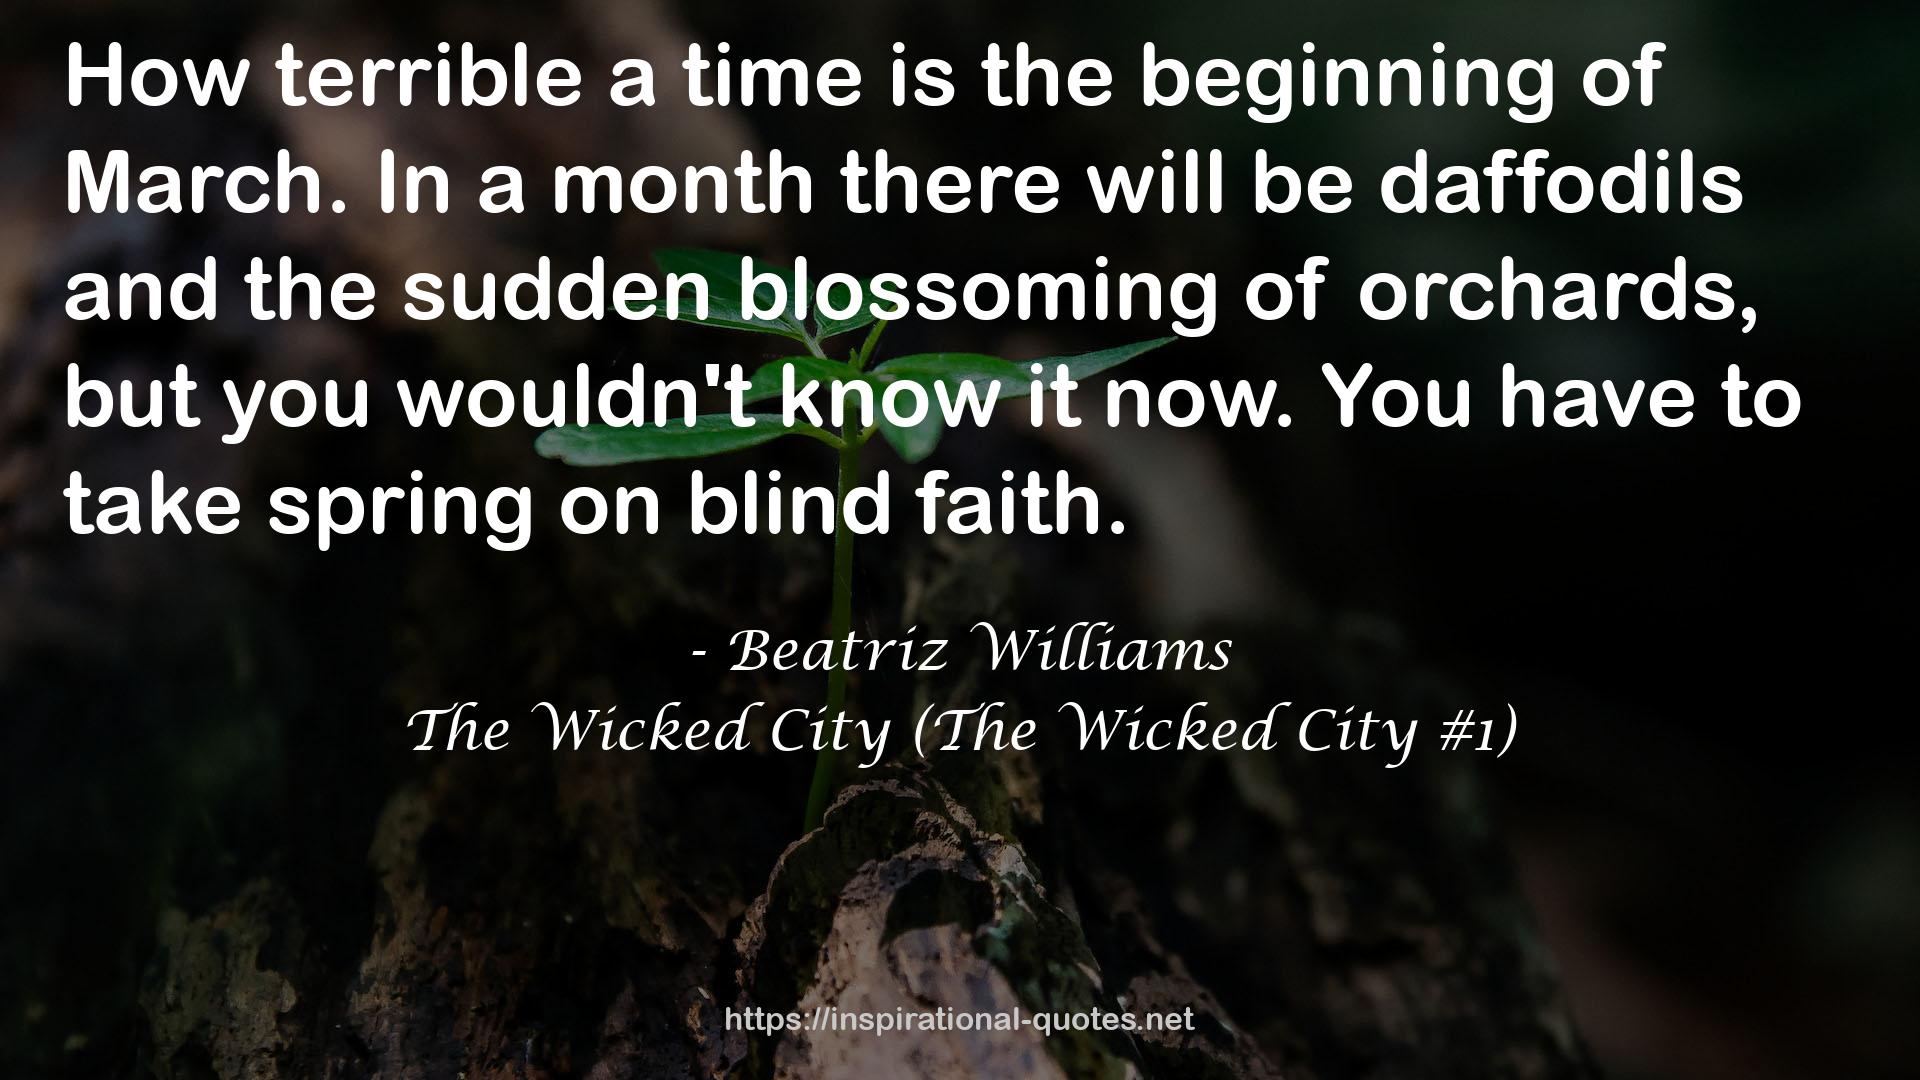 The Wicked City (The Wicked City #1) QUOTES